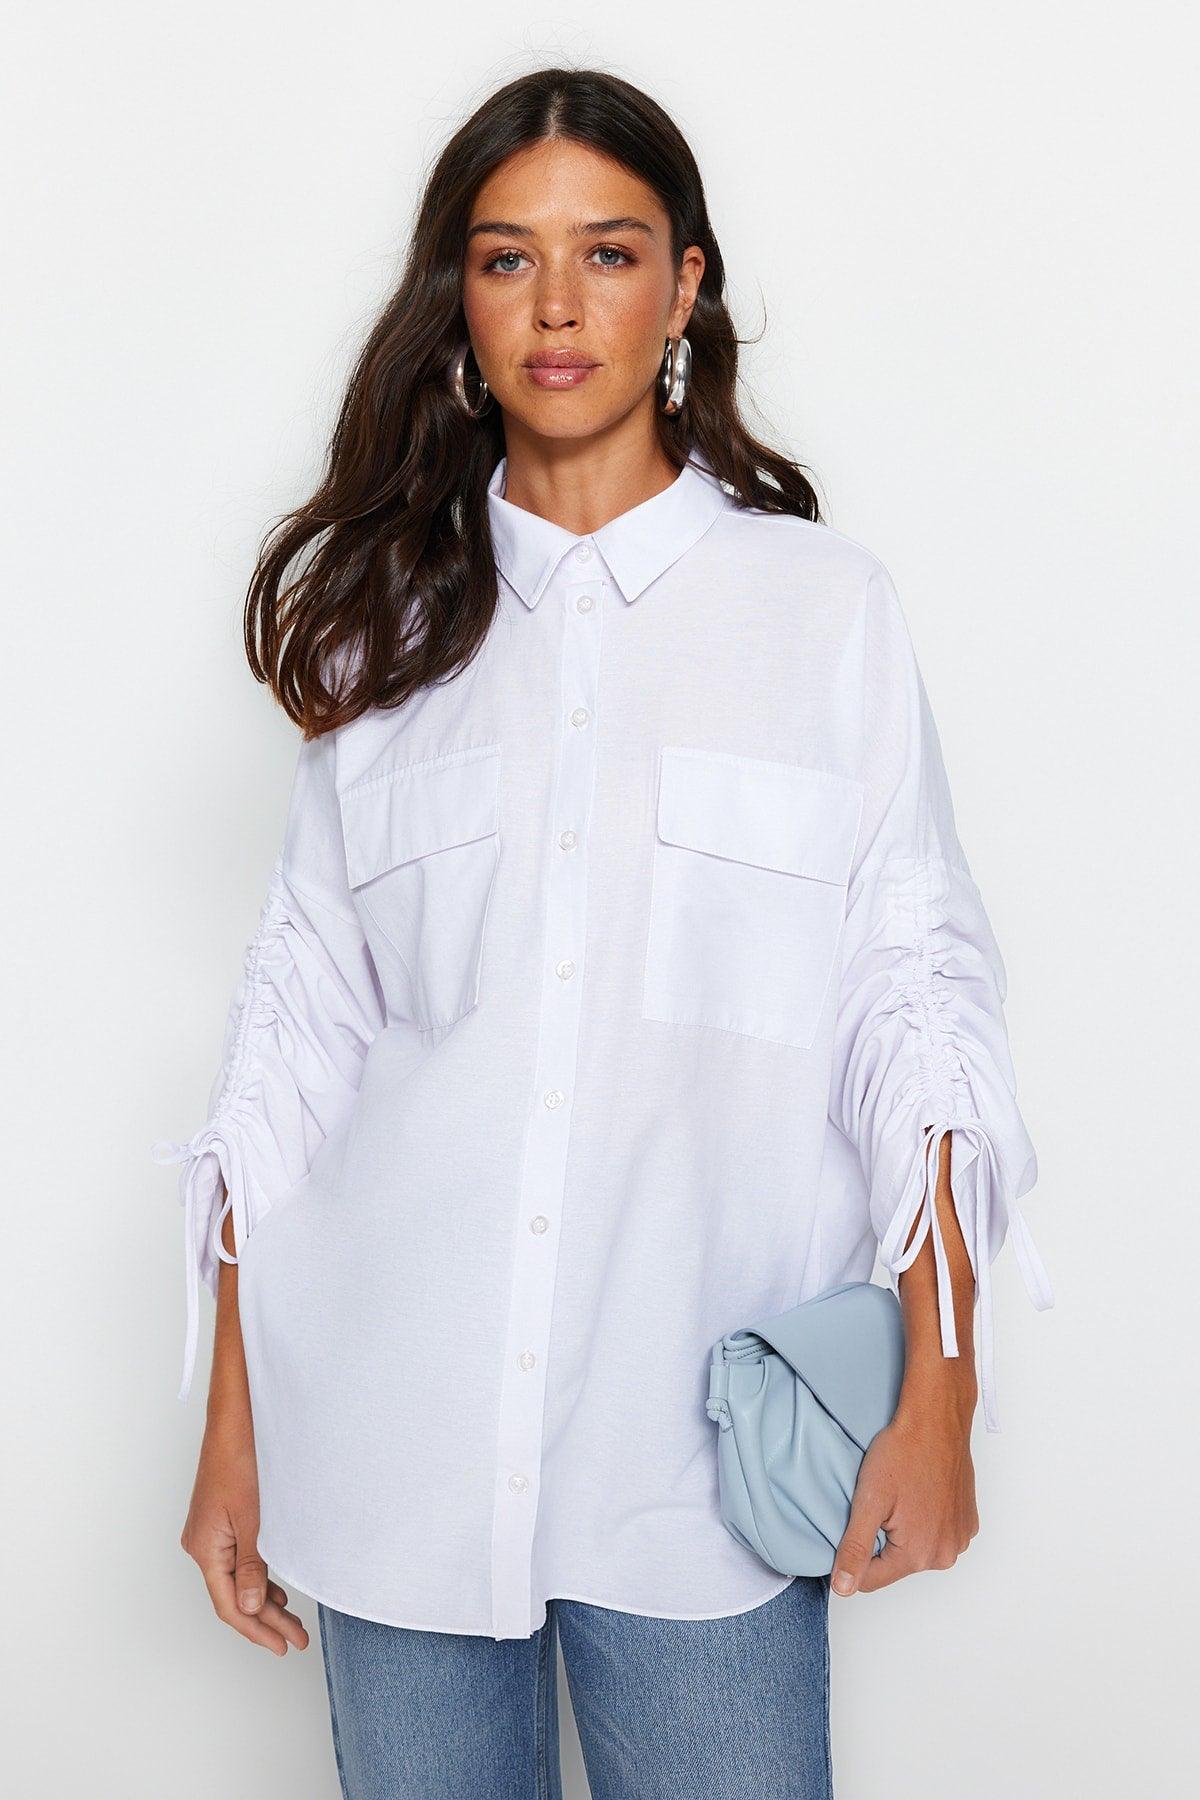 White Adjustable Ruffle Detailed Woven Cotton Shirt with Adjustable Sleeves TCTSS23TG00011 - Swordslife